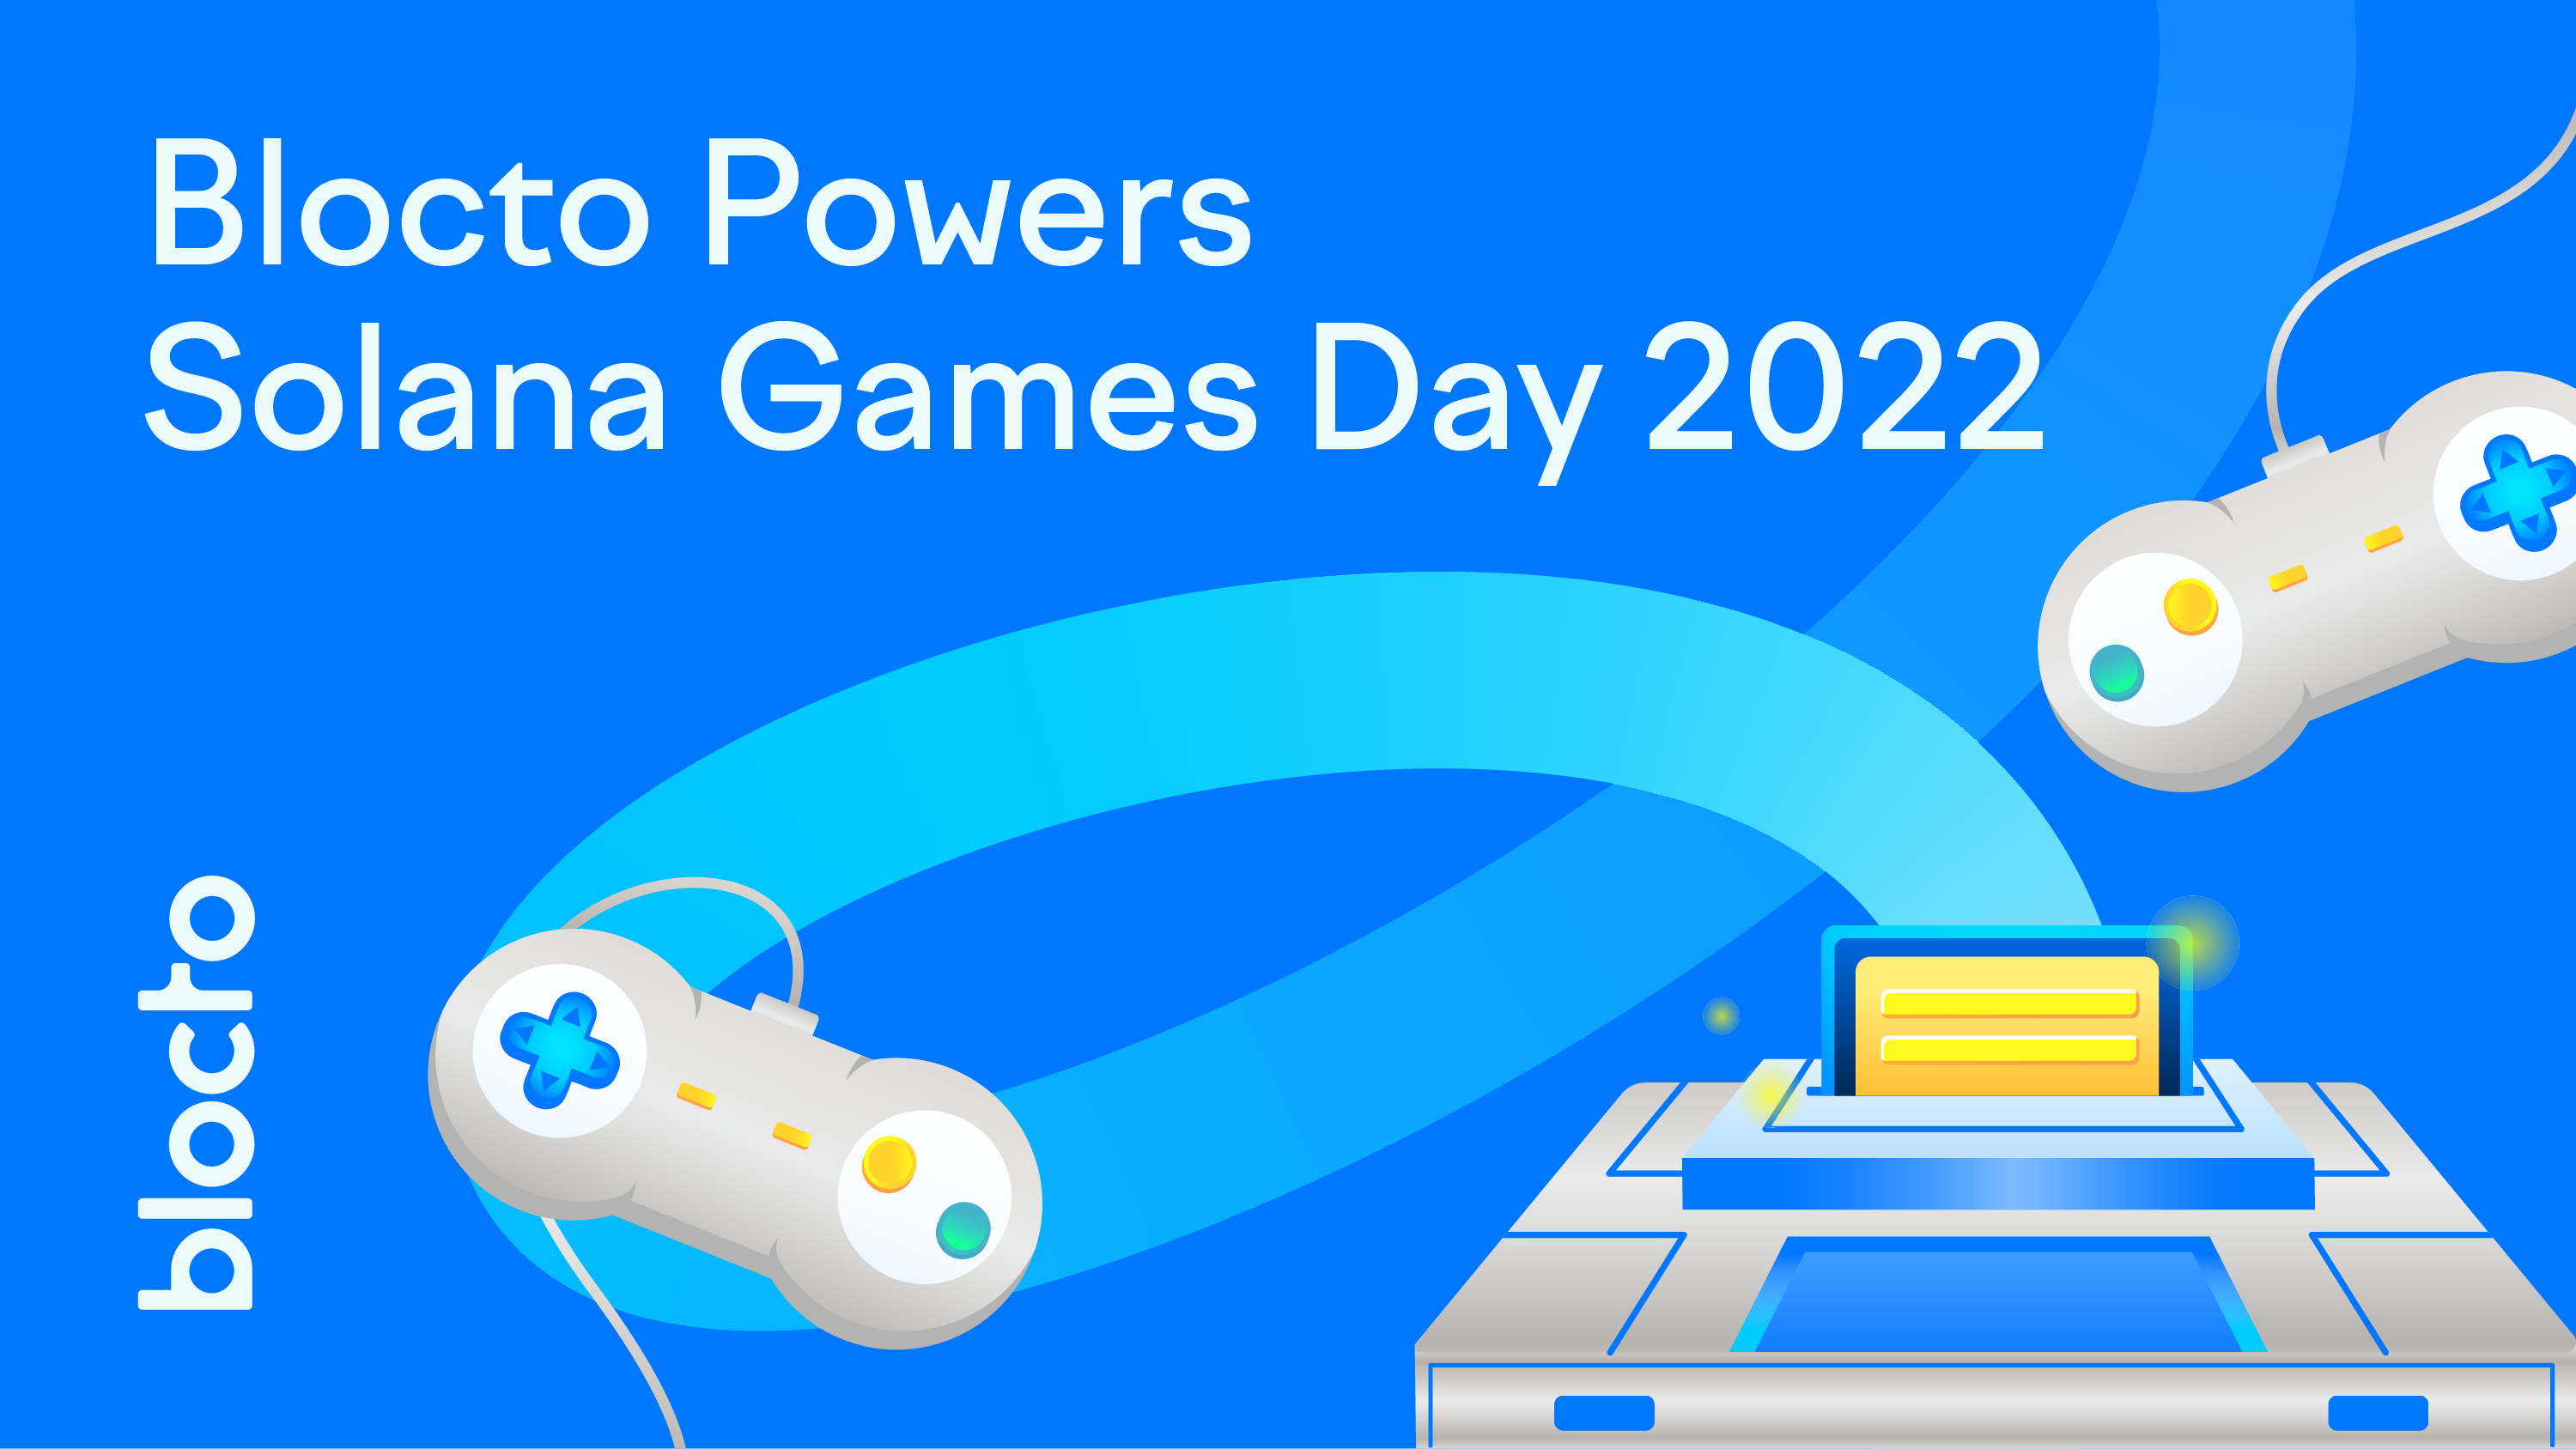 Blocto powers Solana Games Day